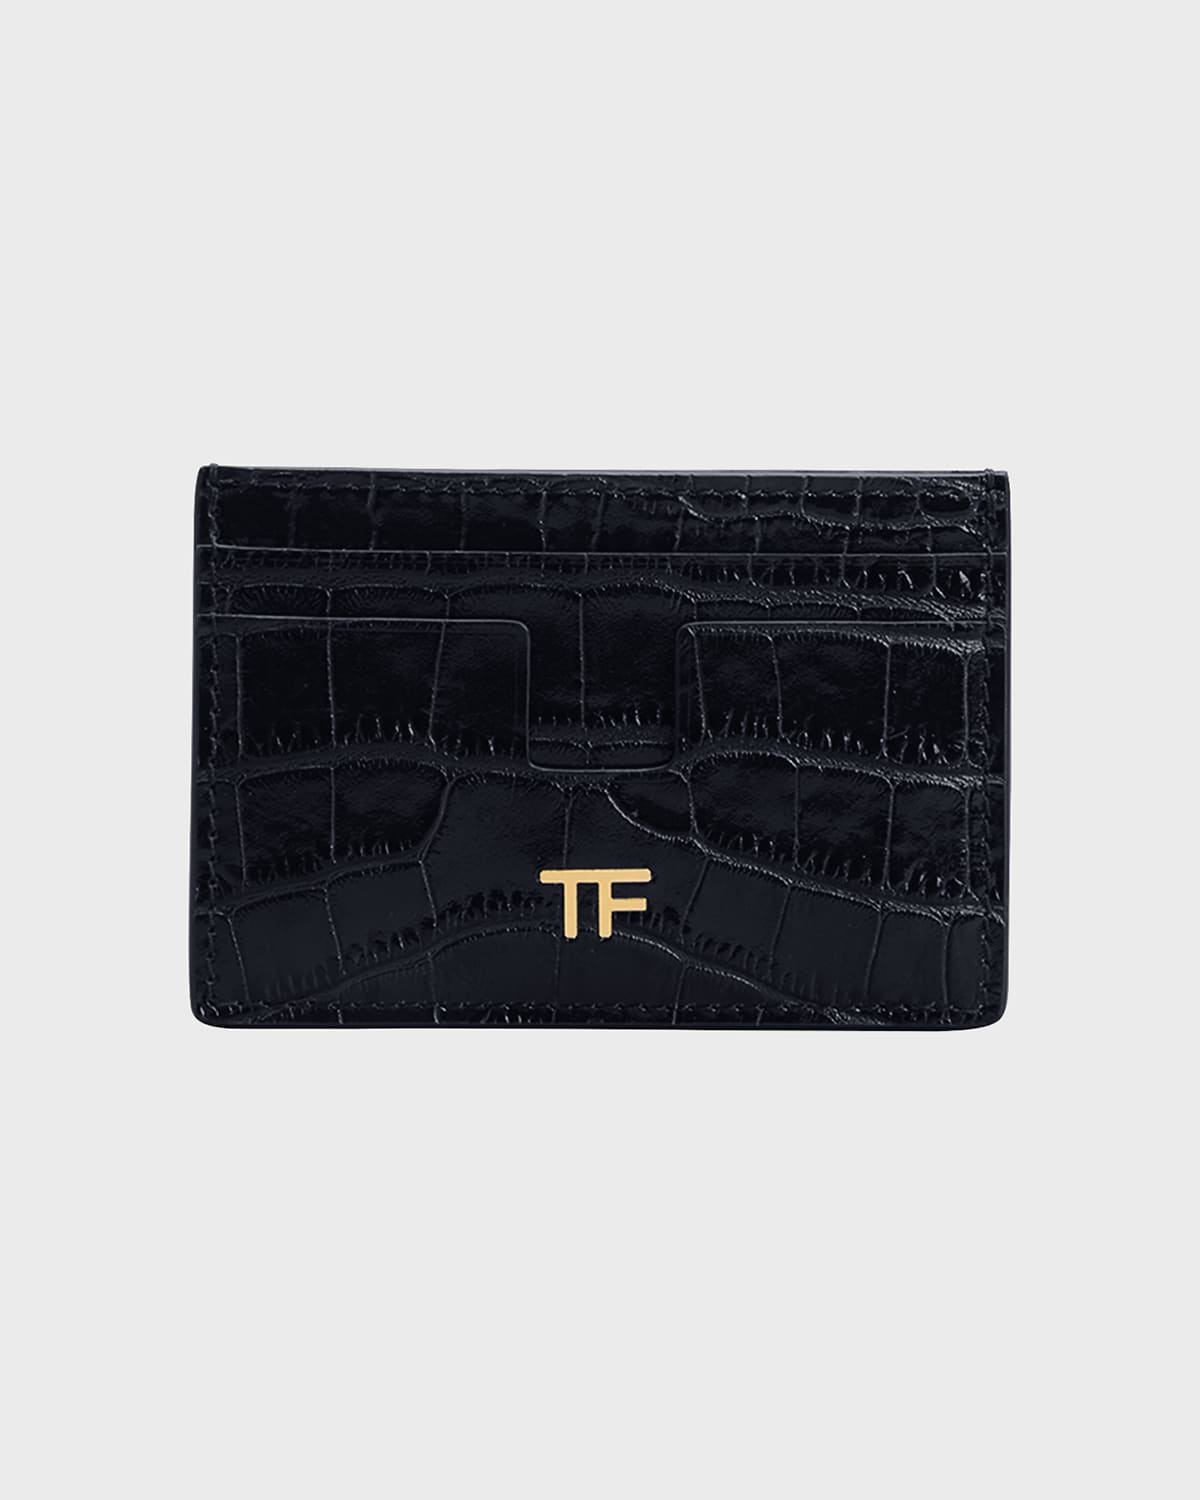 Tom Ford Card Case | Neiman Marcus